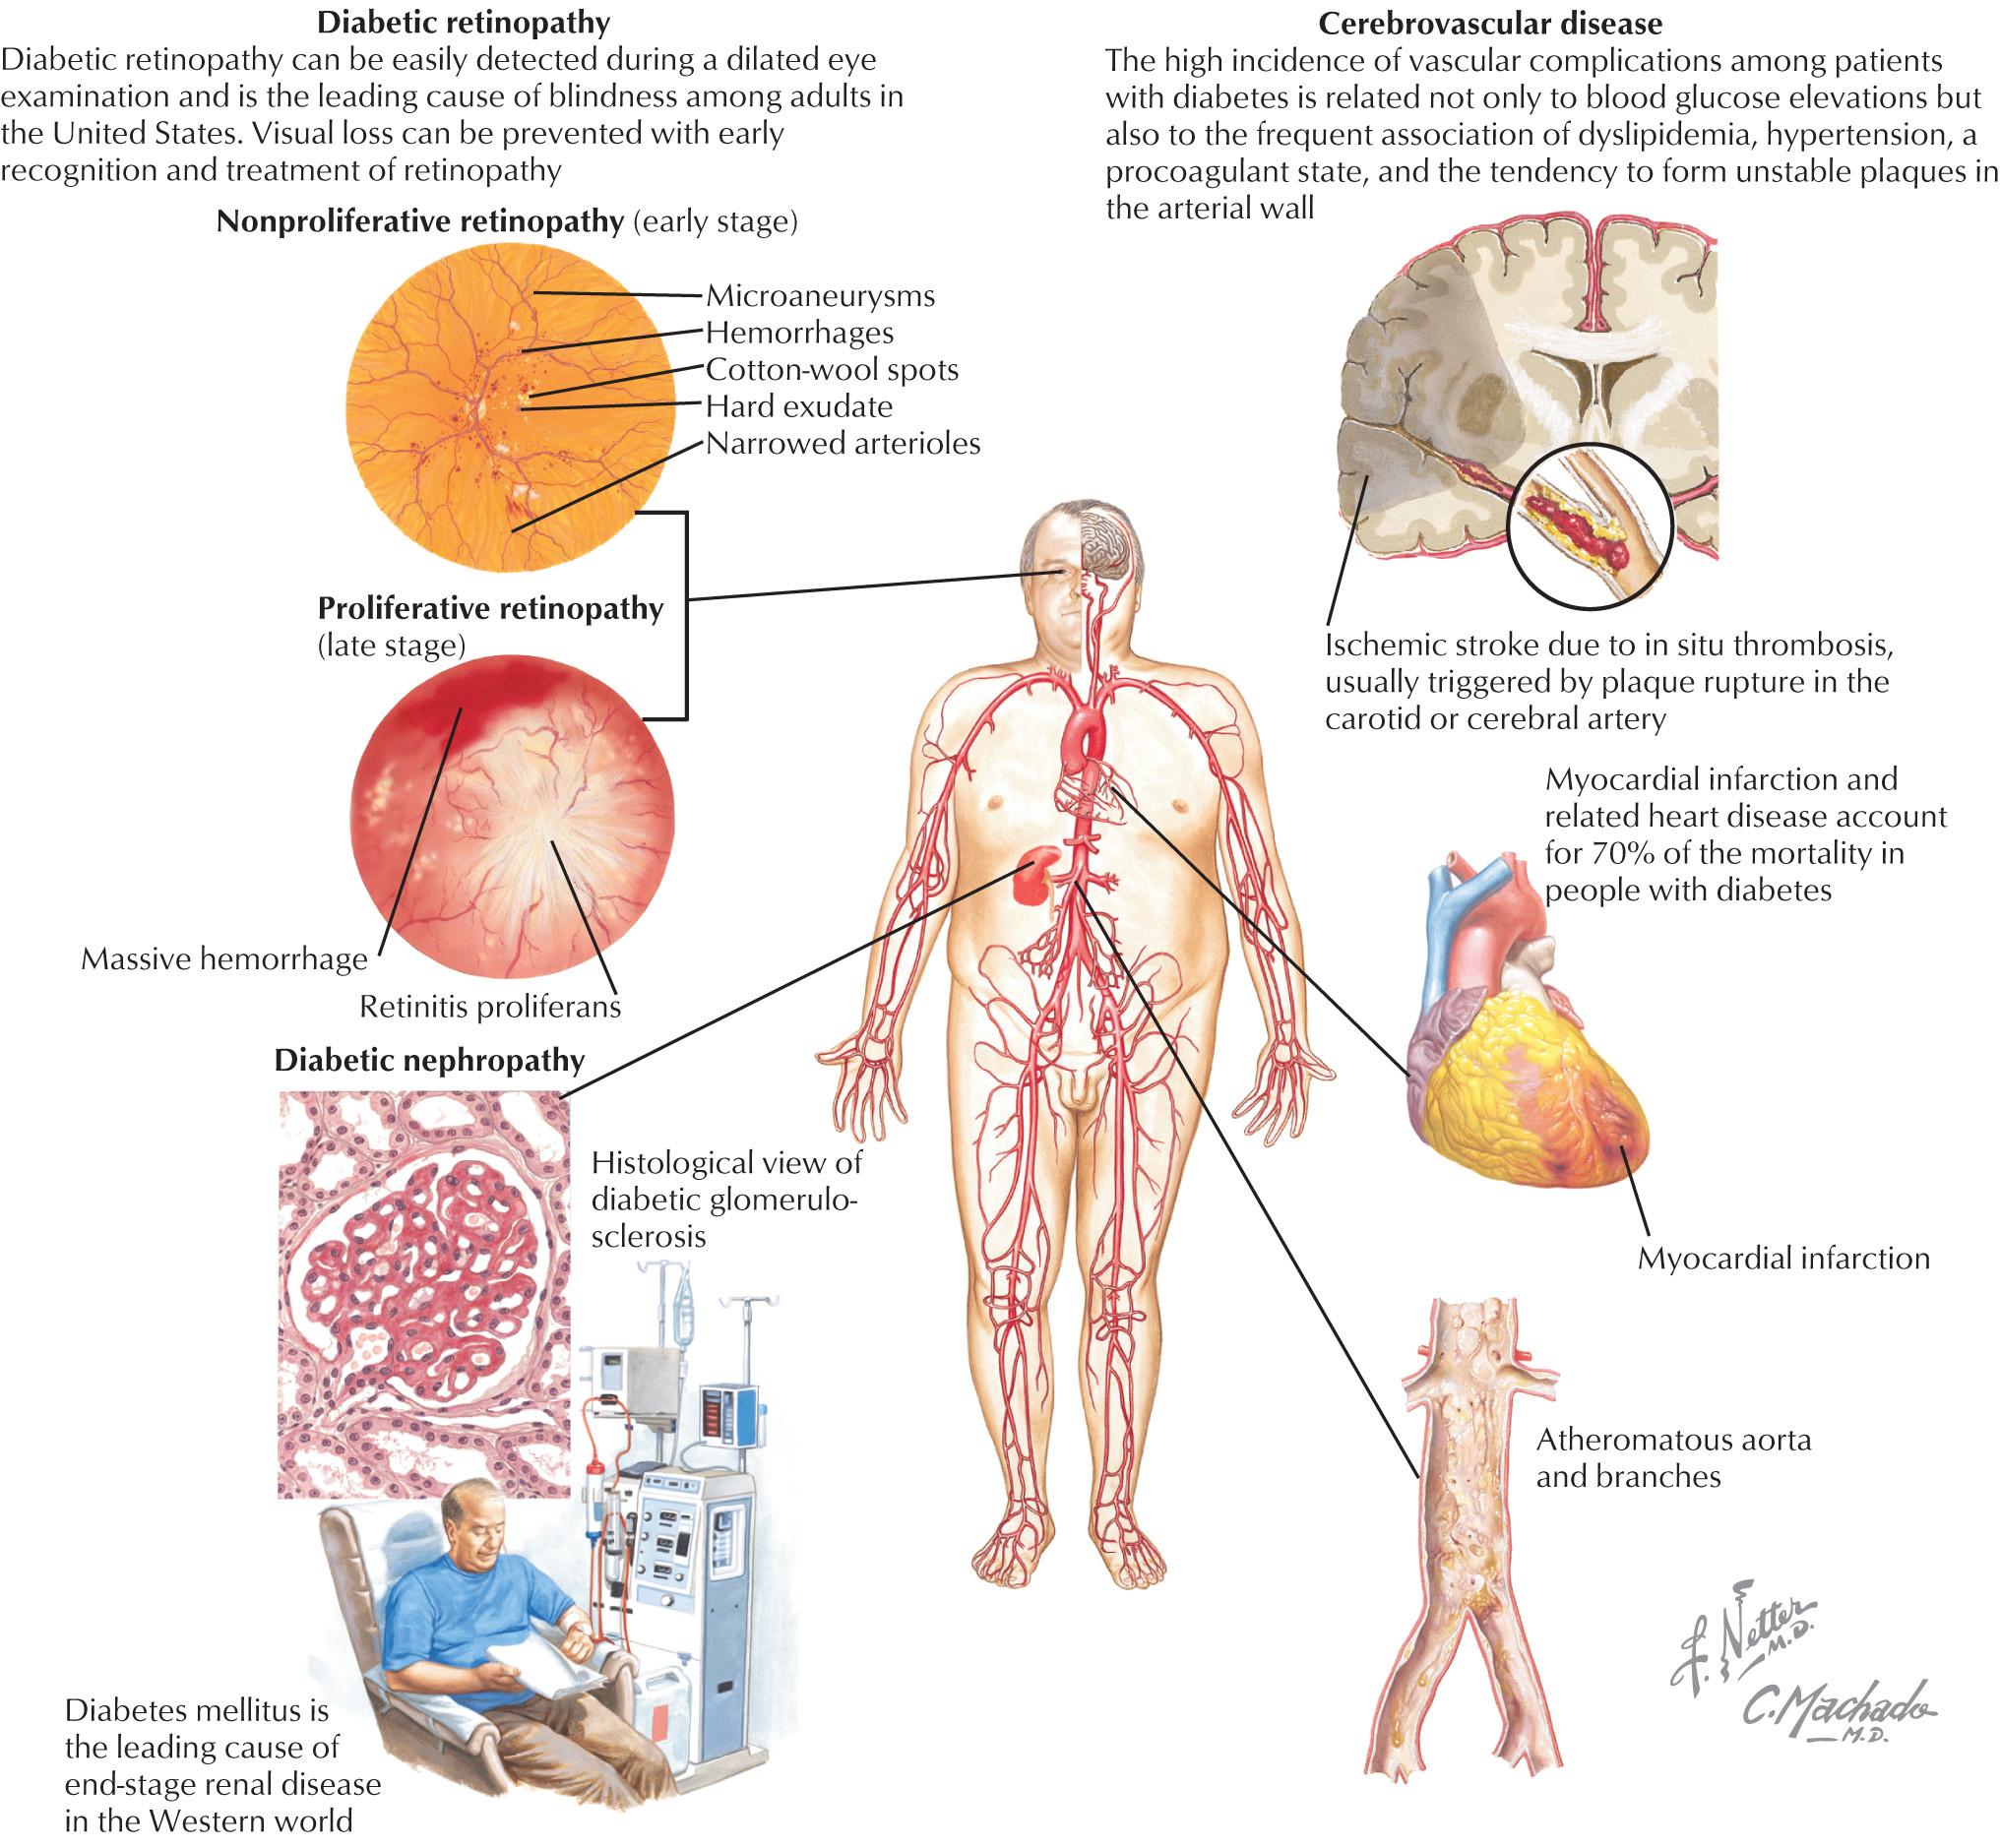 FIG 17.1, Diabetes mellitus and its complications: microvascular and macrovascular complications.